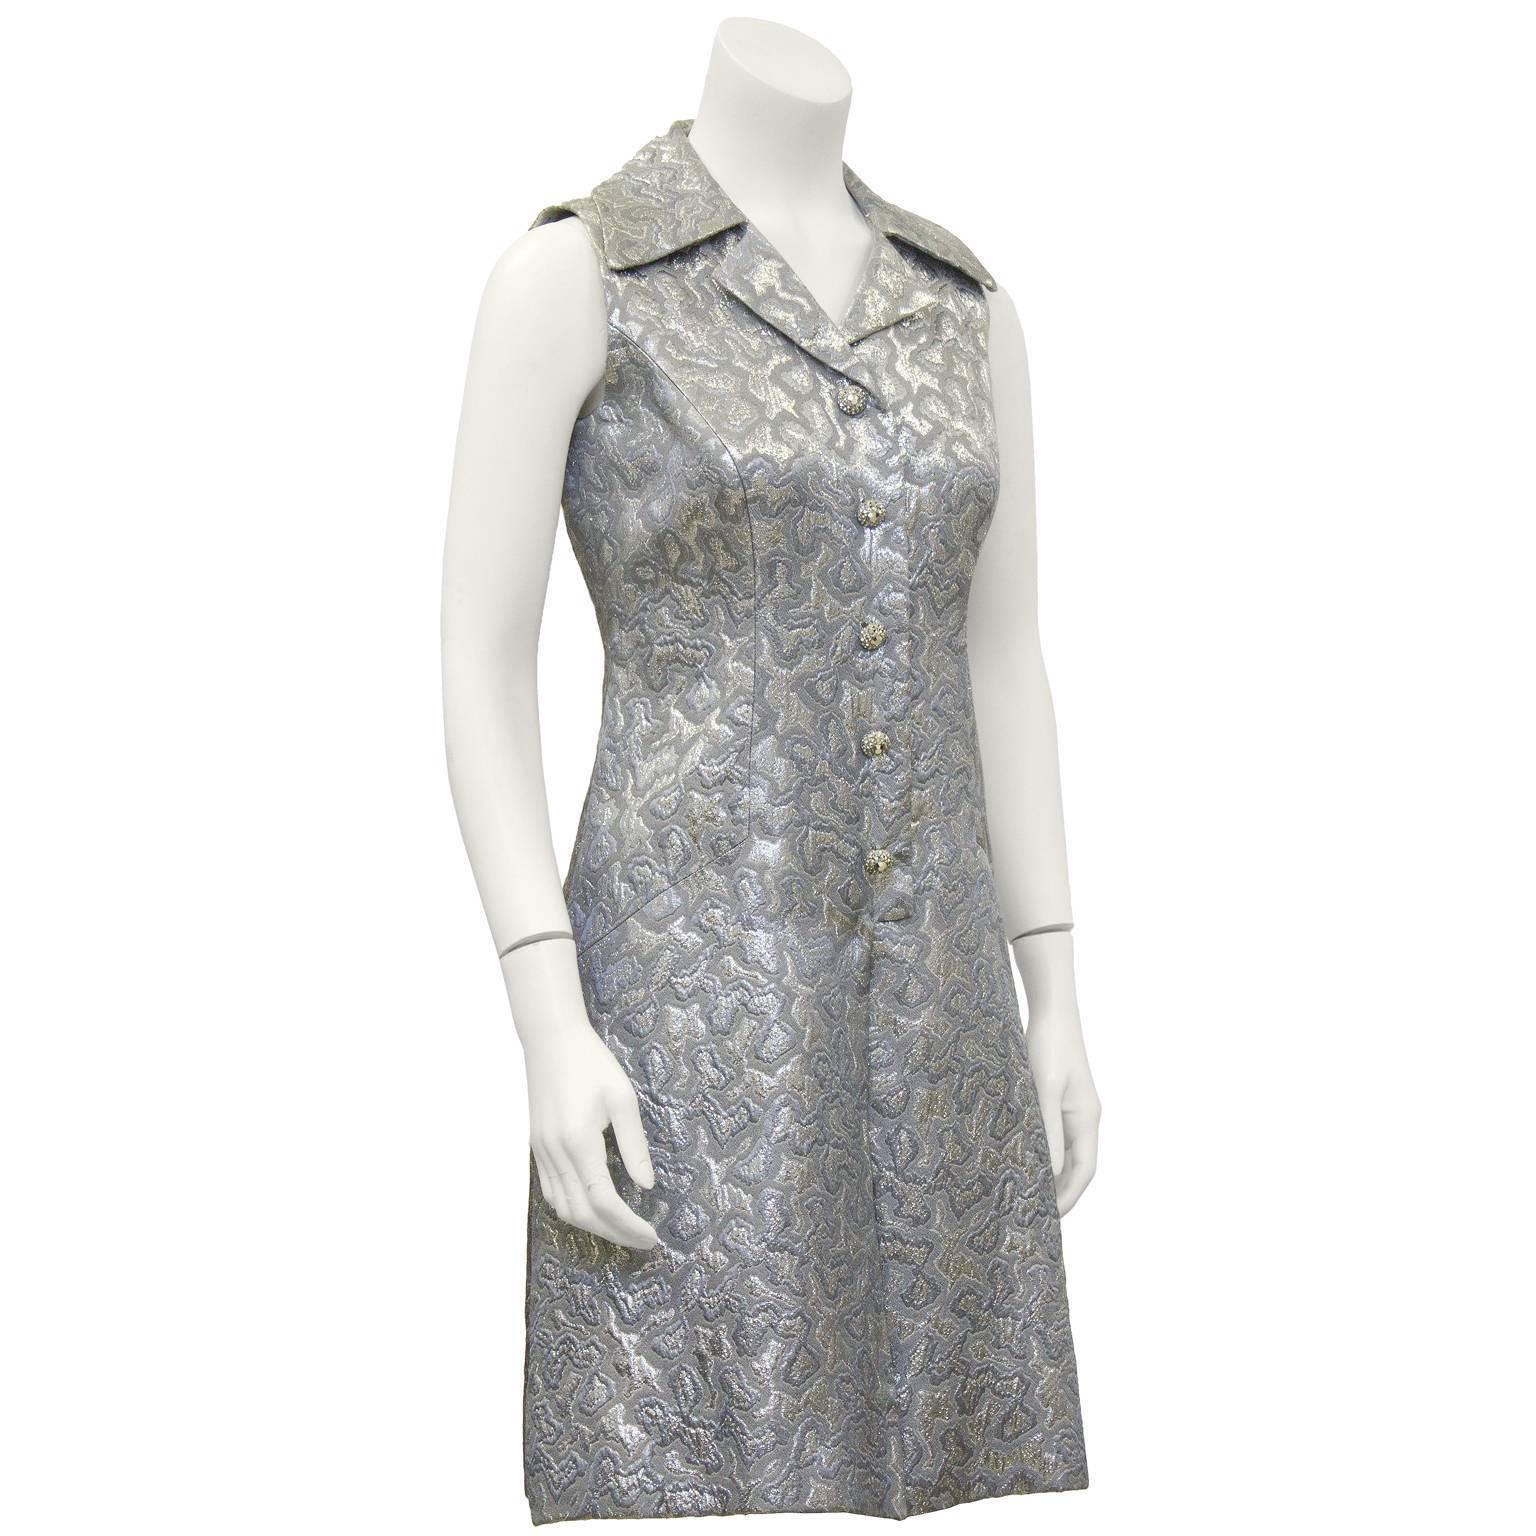 1960's Adele Simpson sophisticated and sporty silver brocade sleeveless dress. Dress has an oversized notched lapel and rhinestone encrusted buttons. Drop style waist with inverted front pleat. The brocade fabric features a silver blend with an